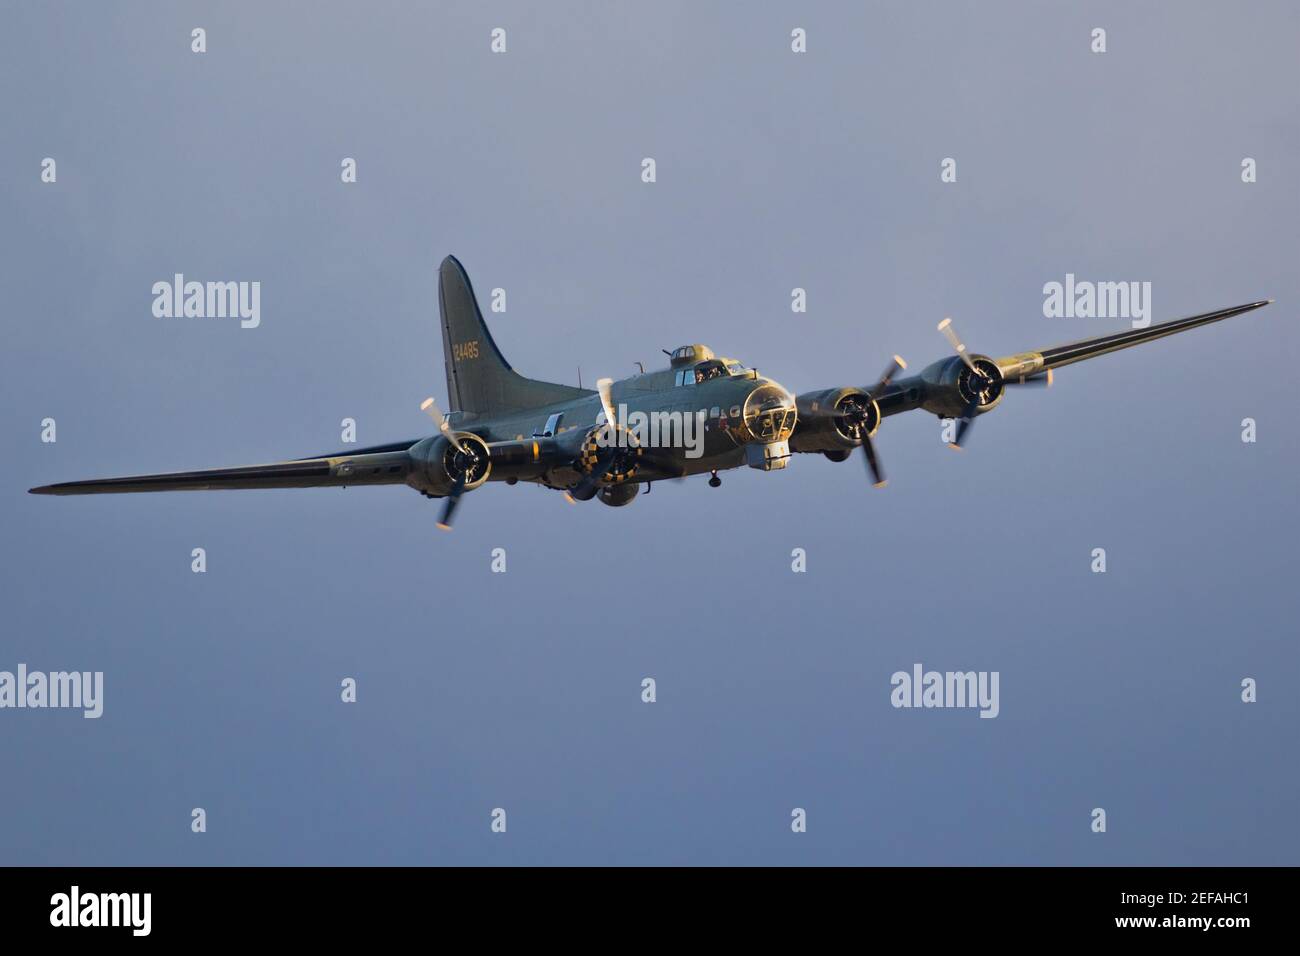 Vintage warbird US Air Force Boeing B-17 Flying Fortress WW2 bomber plane perforing at the Sanice Sunset Airshow. Belgium - September 13, 2019. Stock Photo